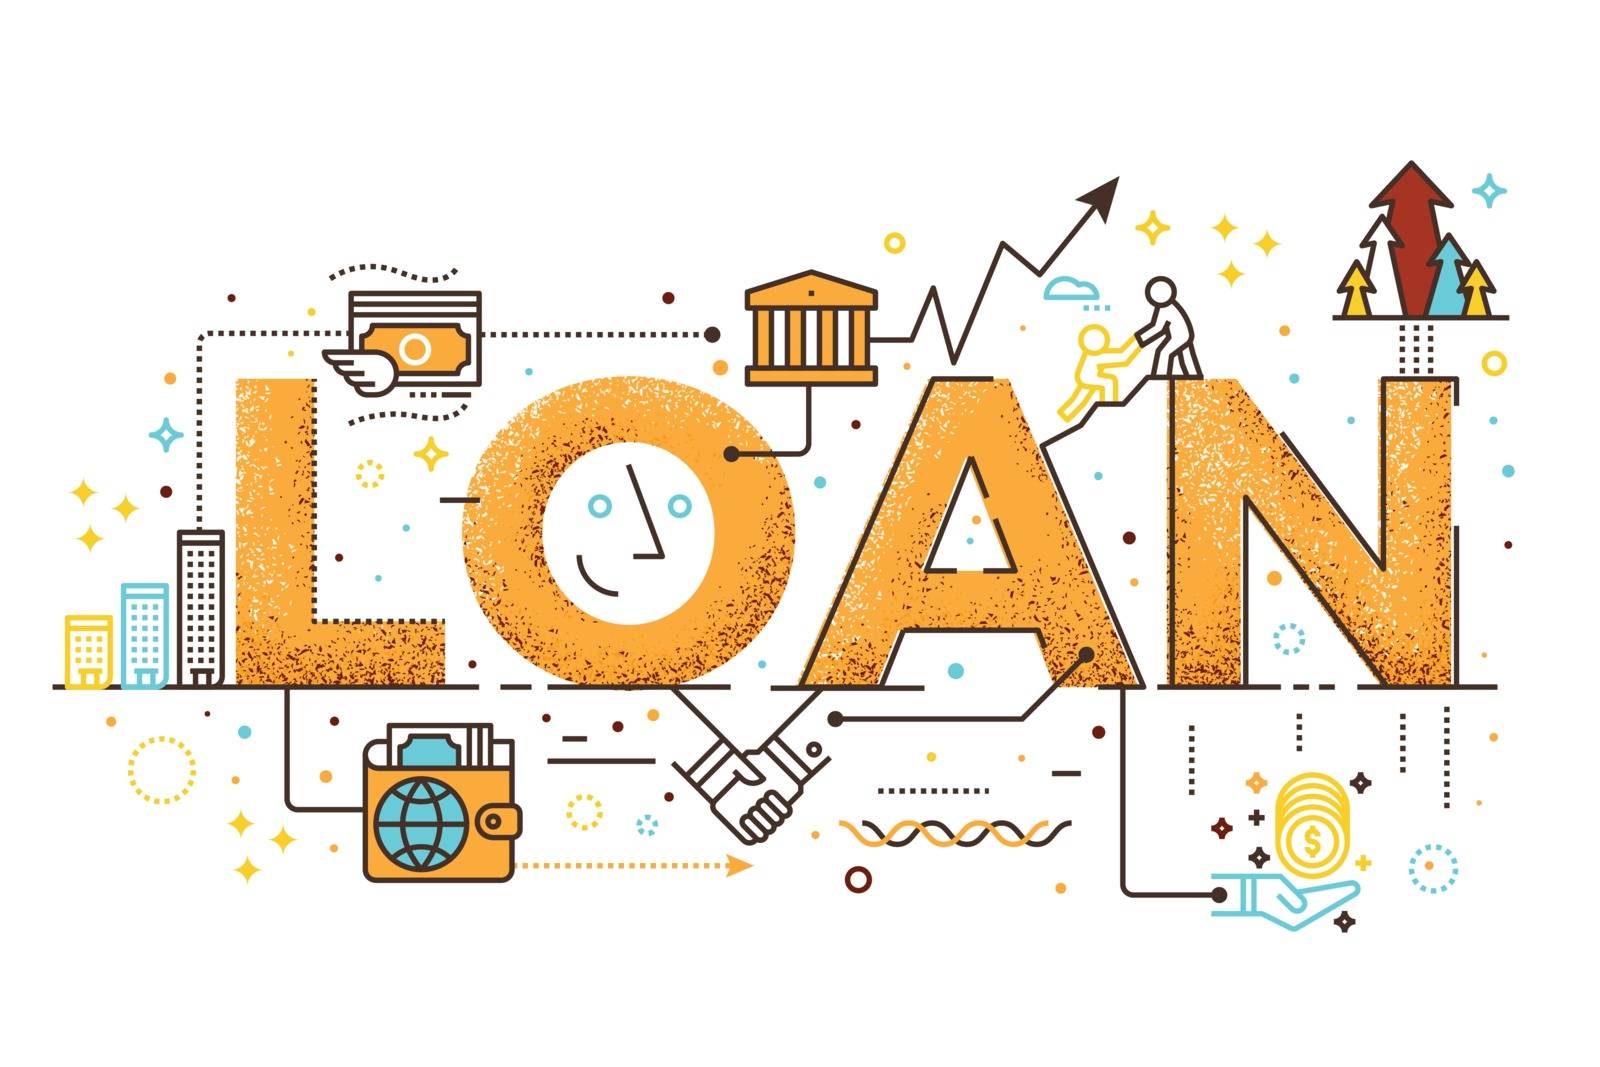 Personal loan illustration by nongpimmy